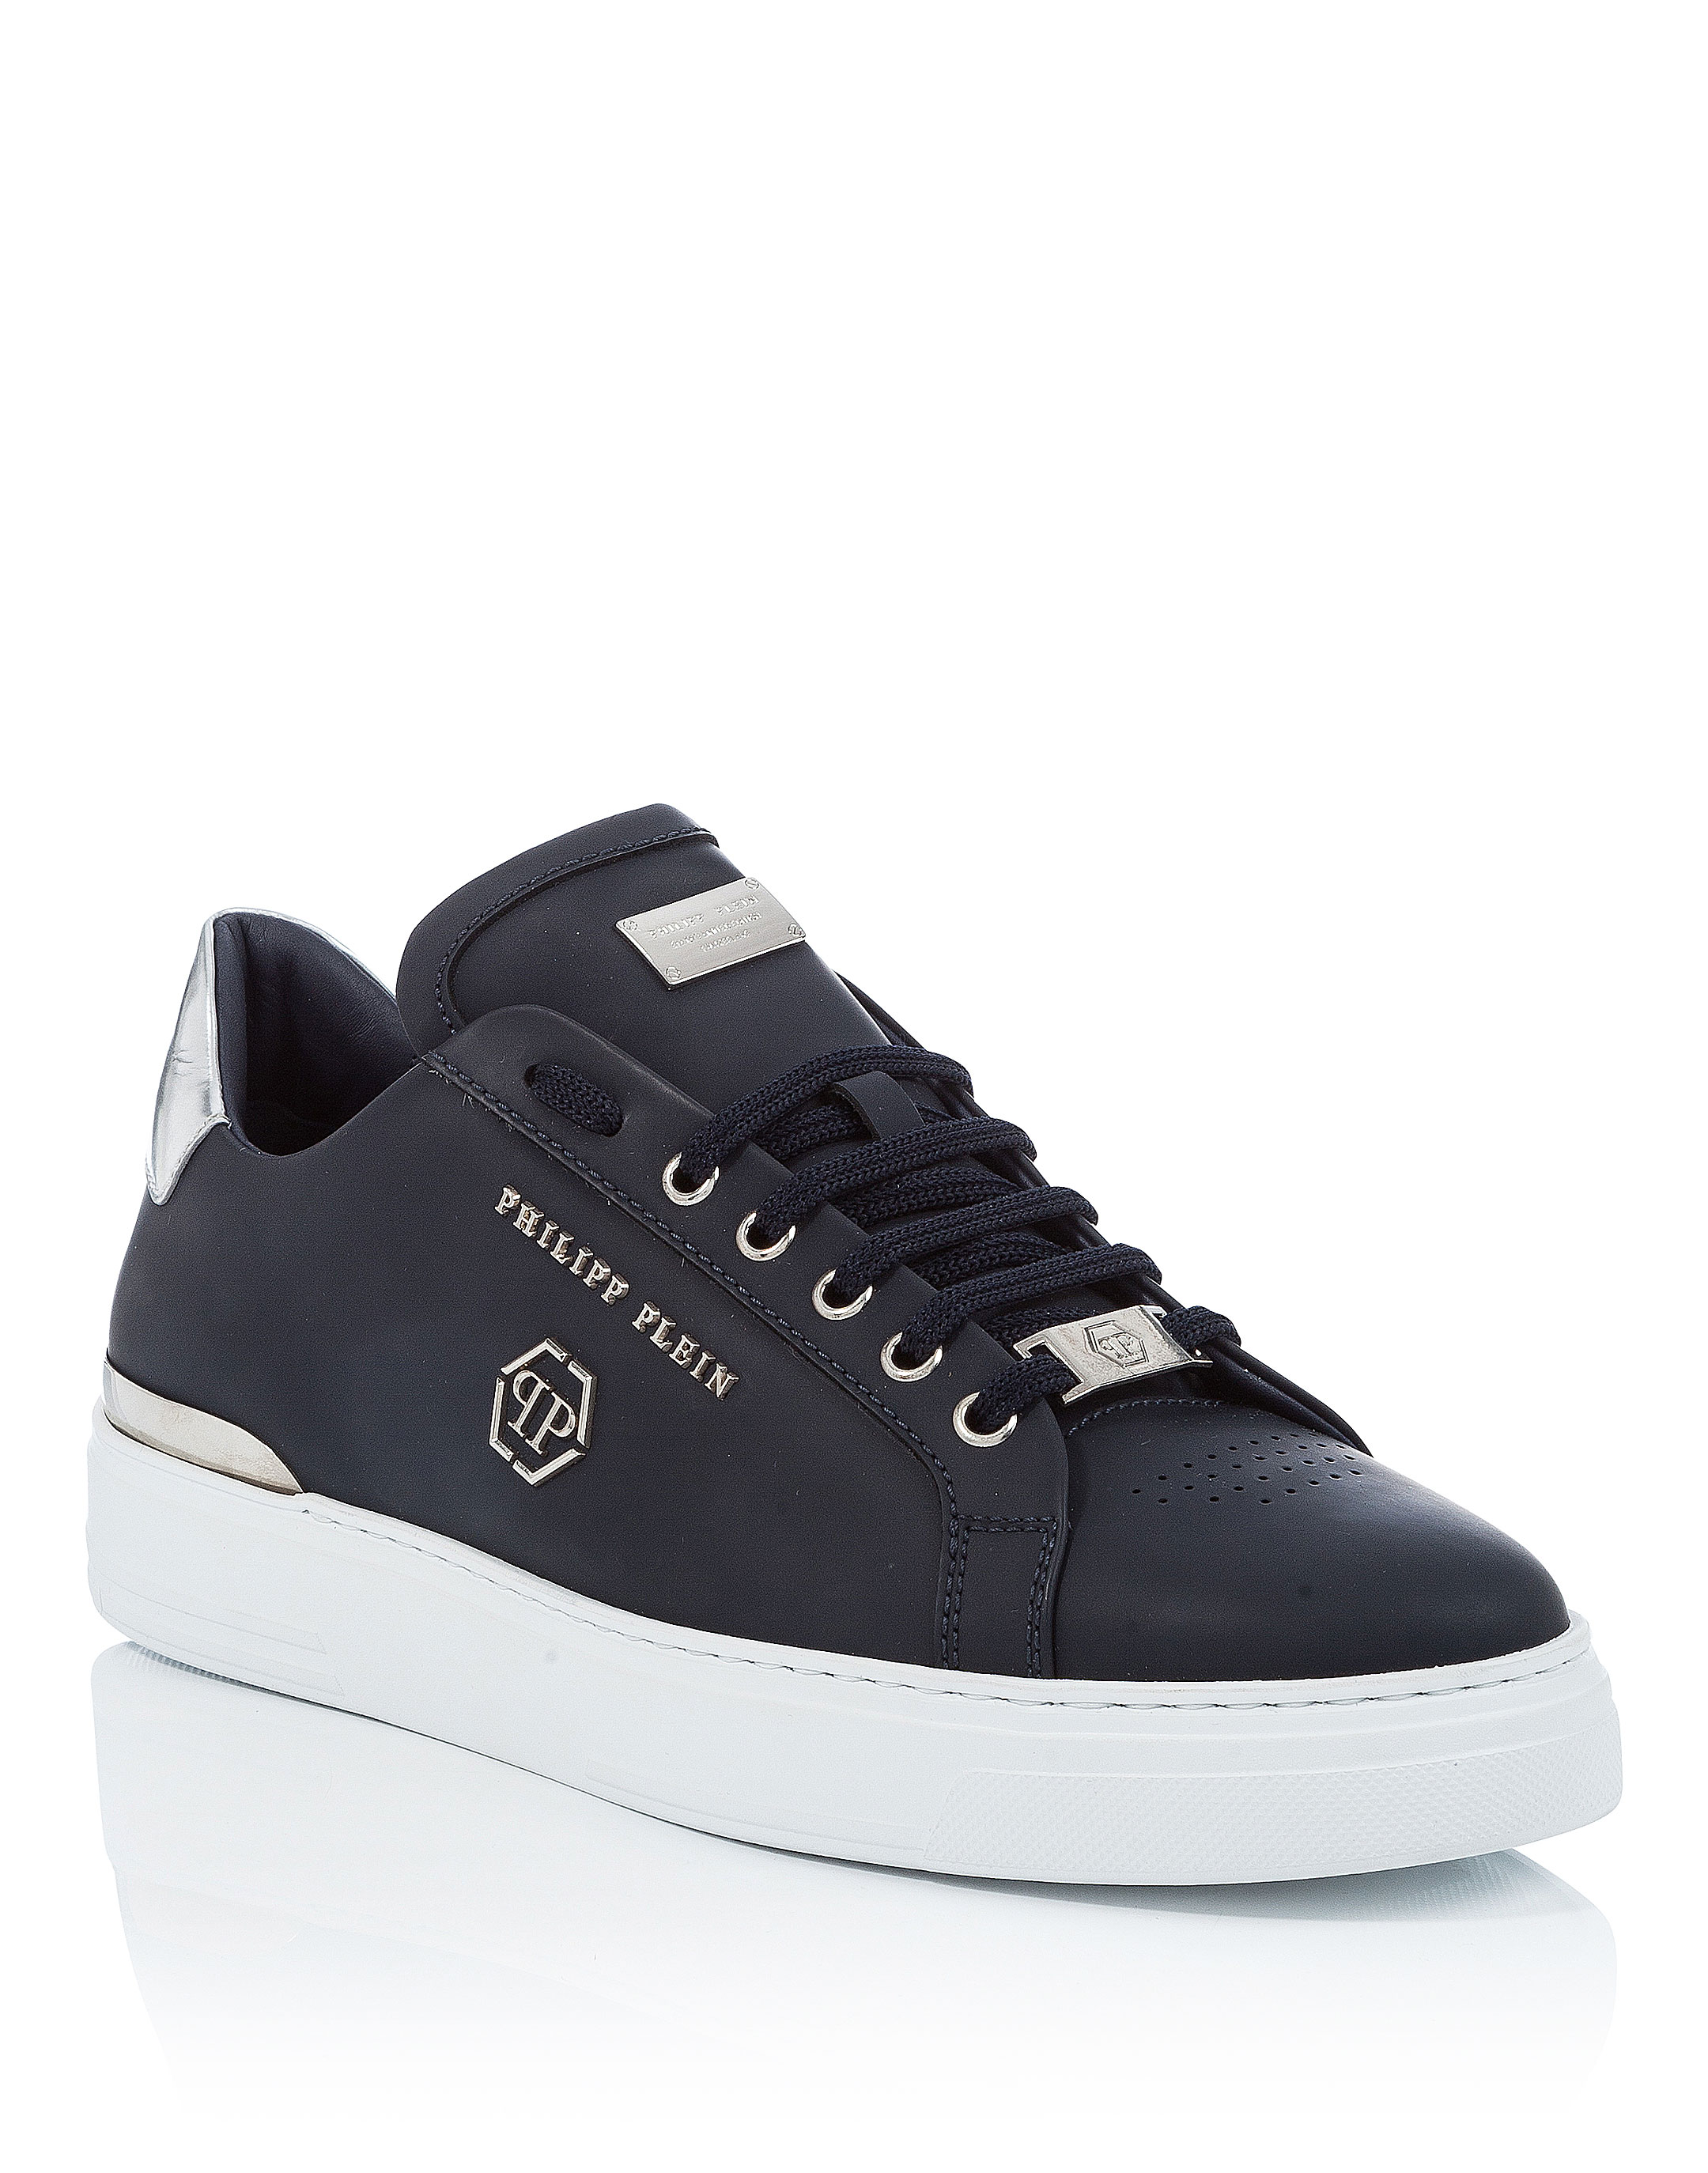 Lo-Top Sneakers "Over a border" | Philipp Plein Outlet